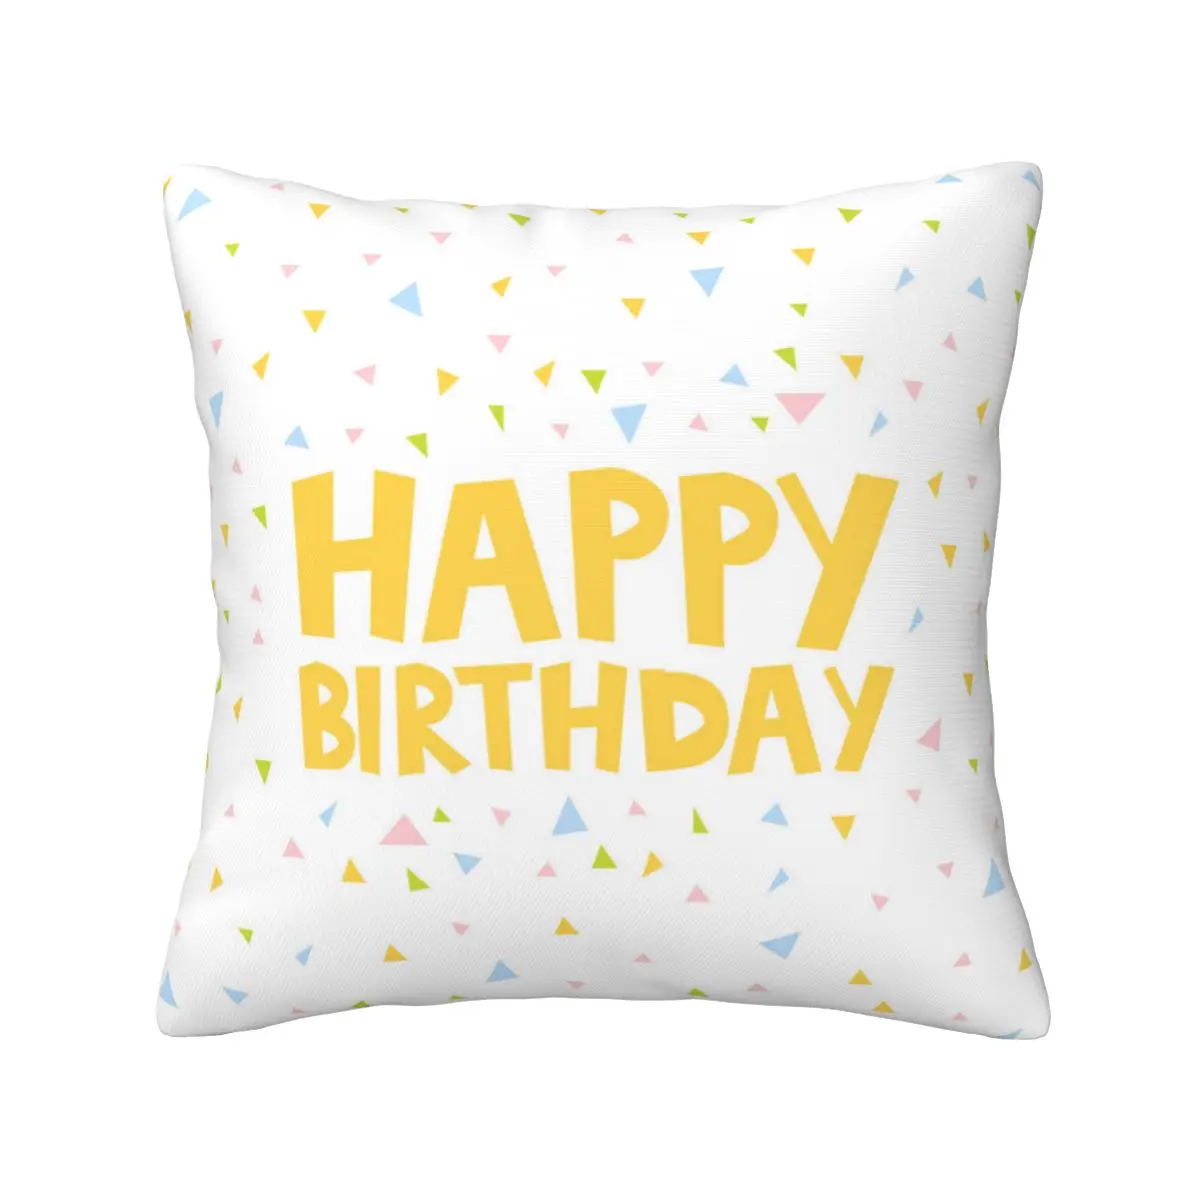 

Happy Birthday Comfort Non-Fading Skin-Friendly Pillow Sofa Waist Support Pillow Not Deformed Comfort Home Decoration Items Cute